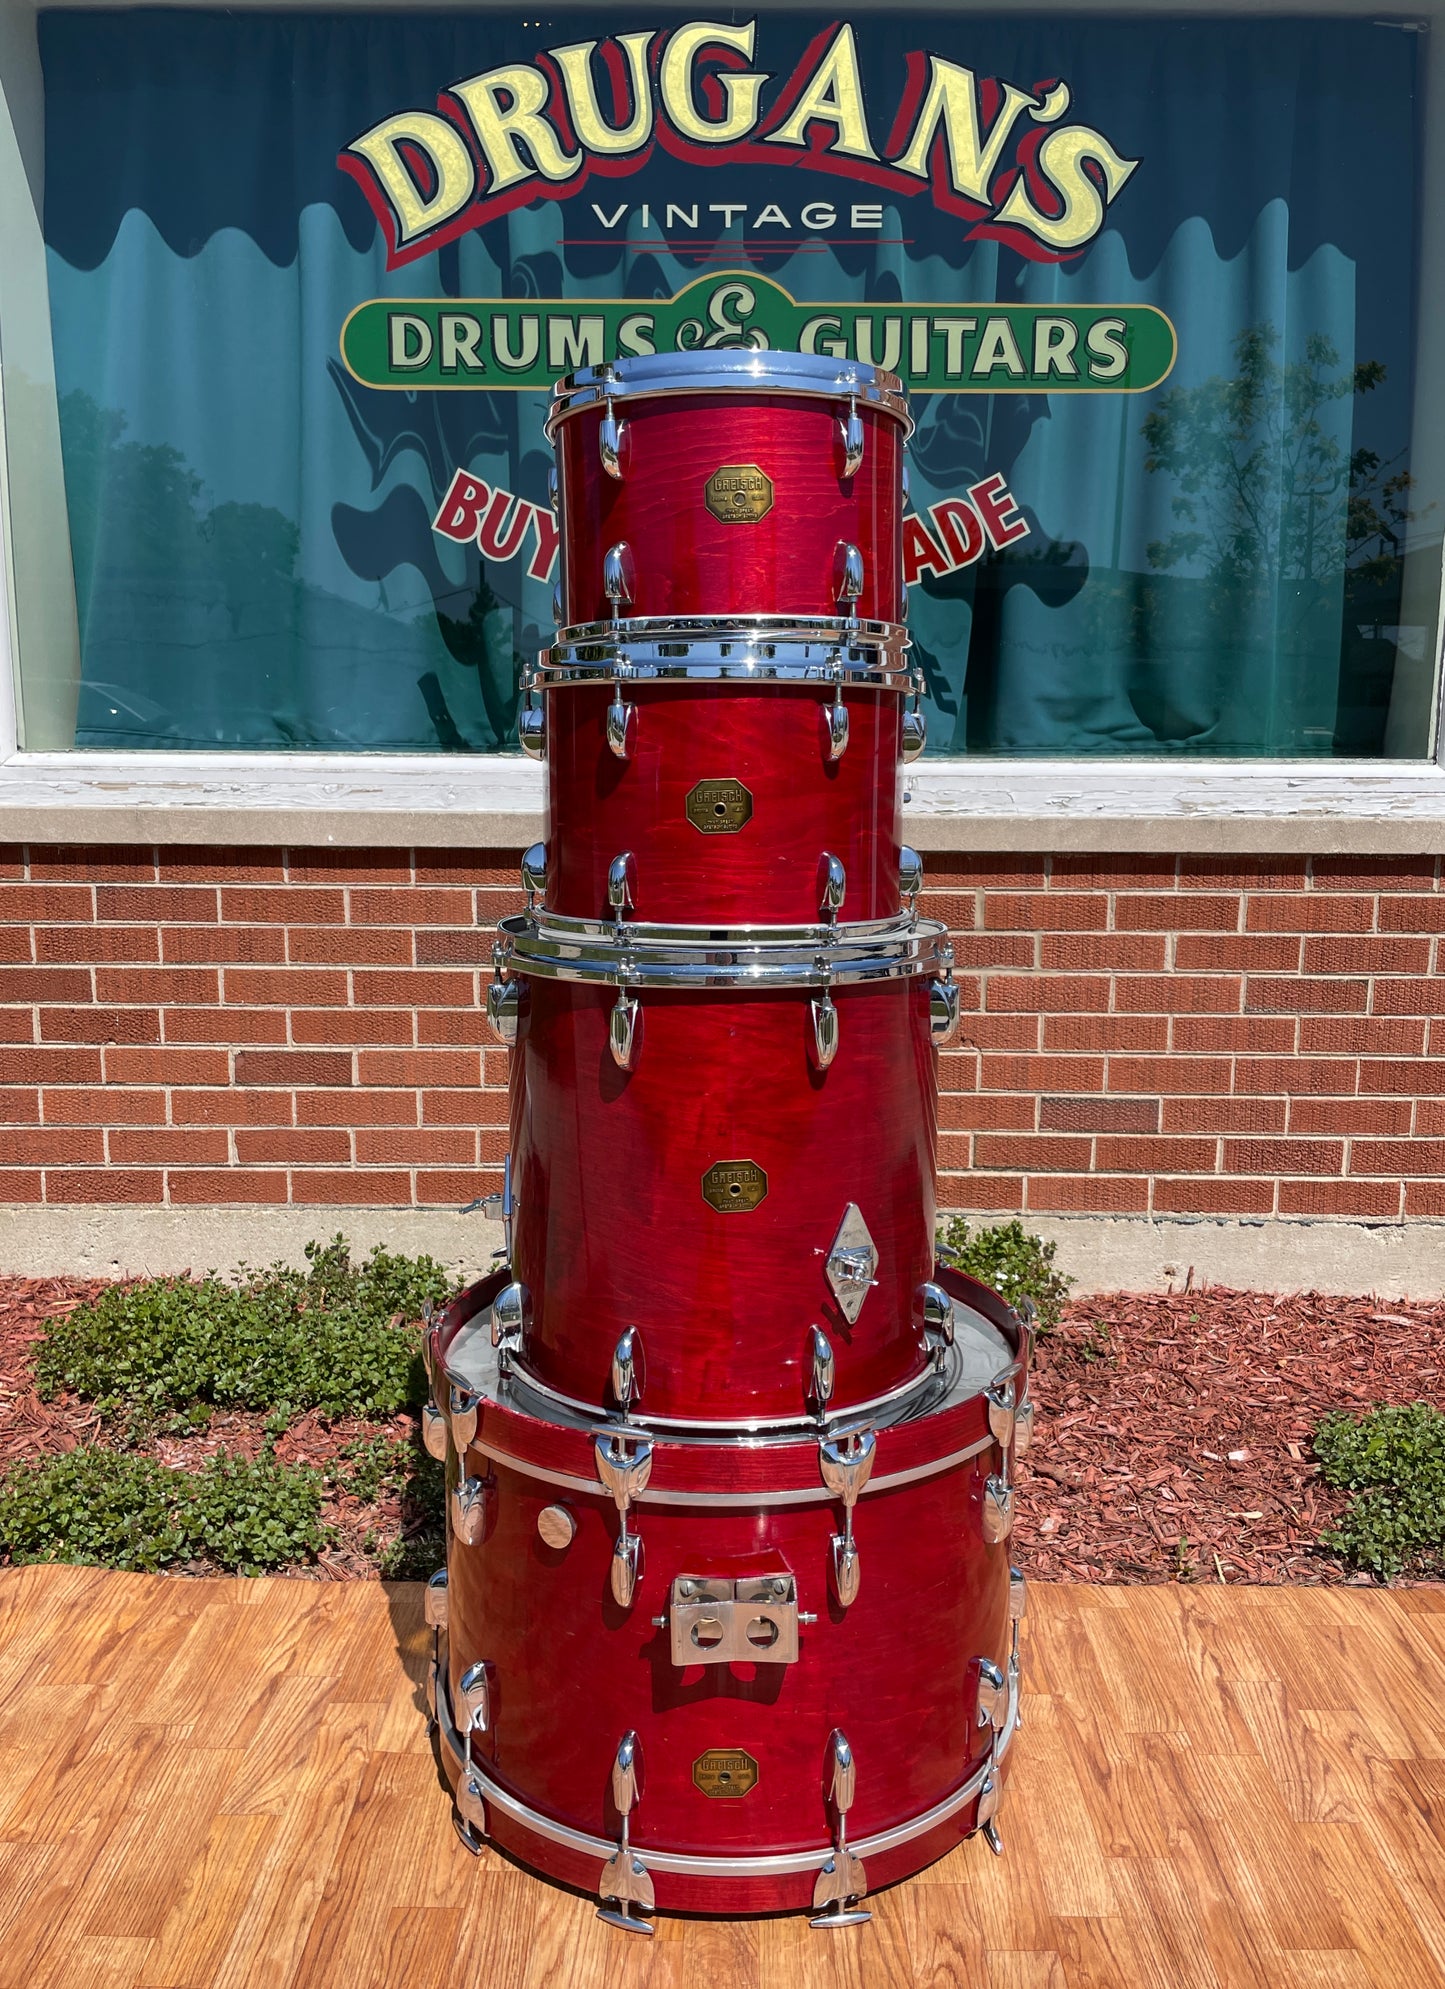 1970s Gretsch Stop Sign Badge Drum Set Red Rosewood 22/12/13/16